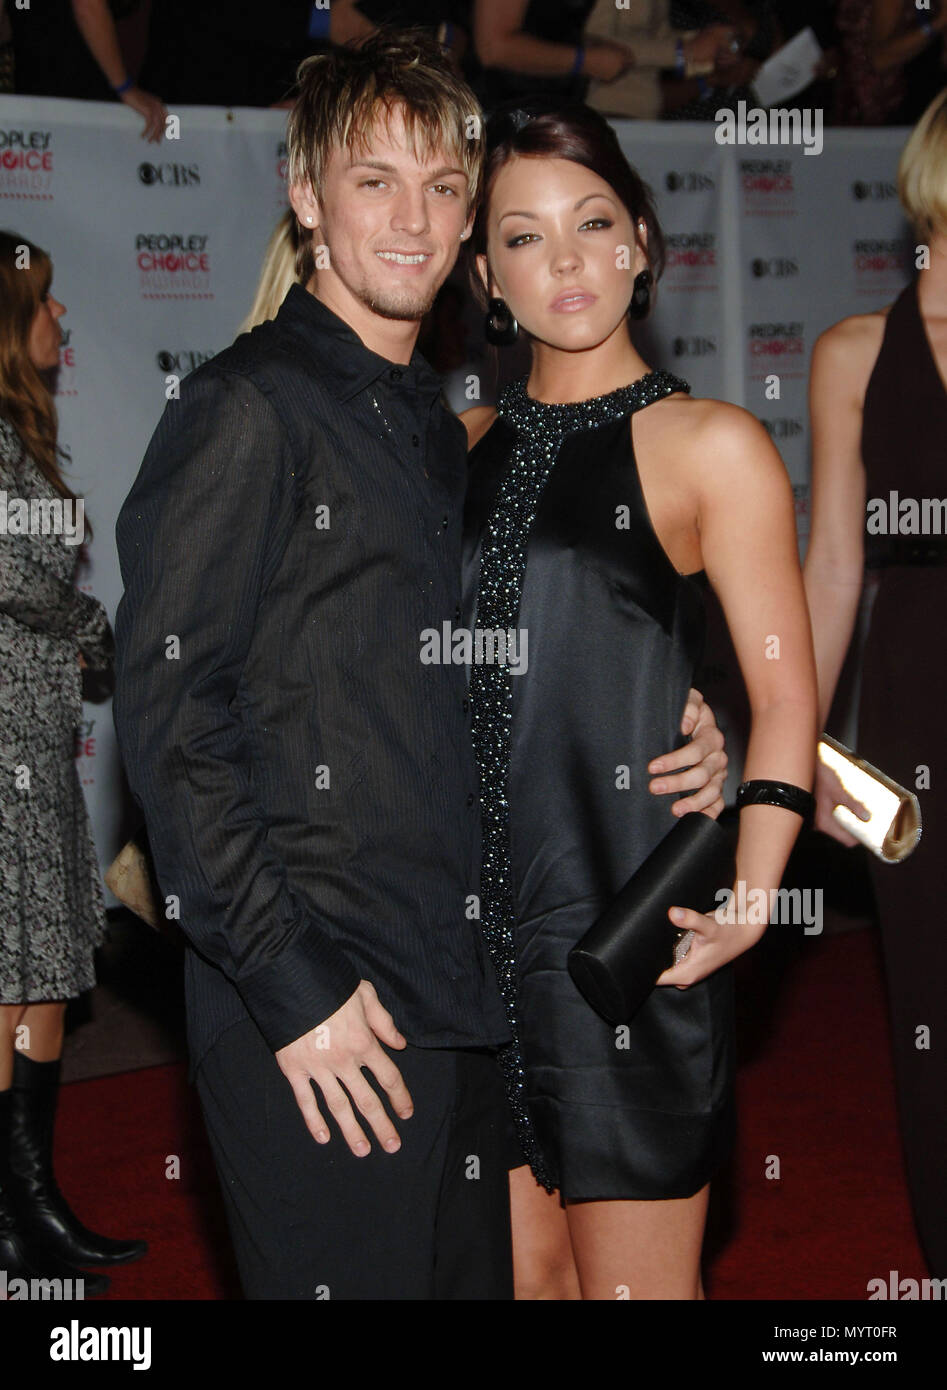 Aaron Carter And Kaci Brown At The People Choice Awards At The Shrine Auditorium In Los Angeles 